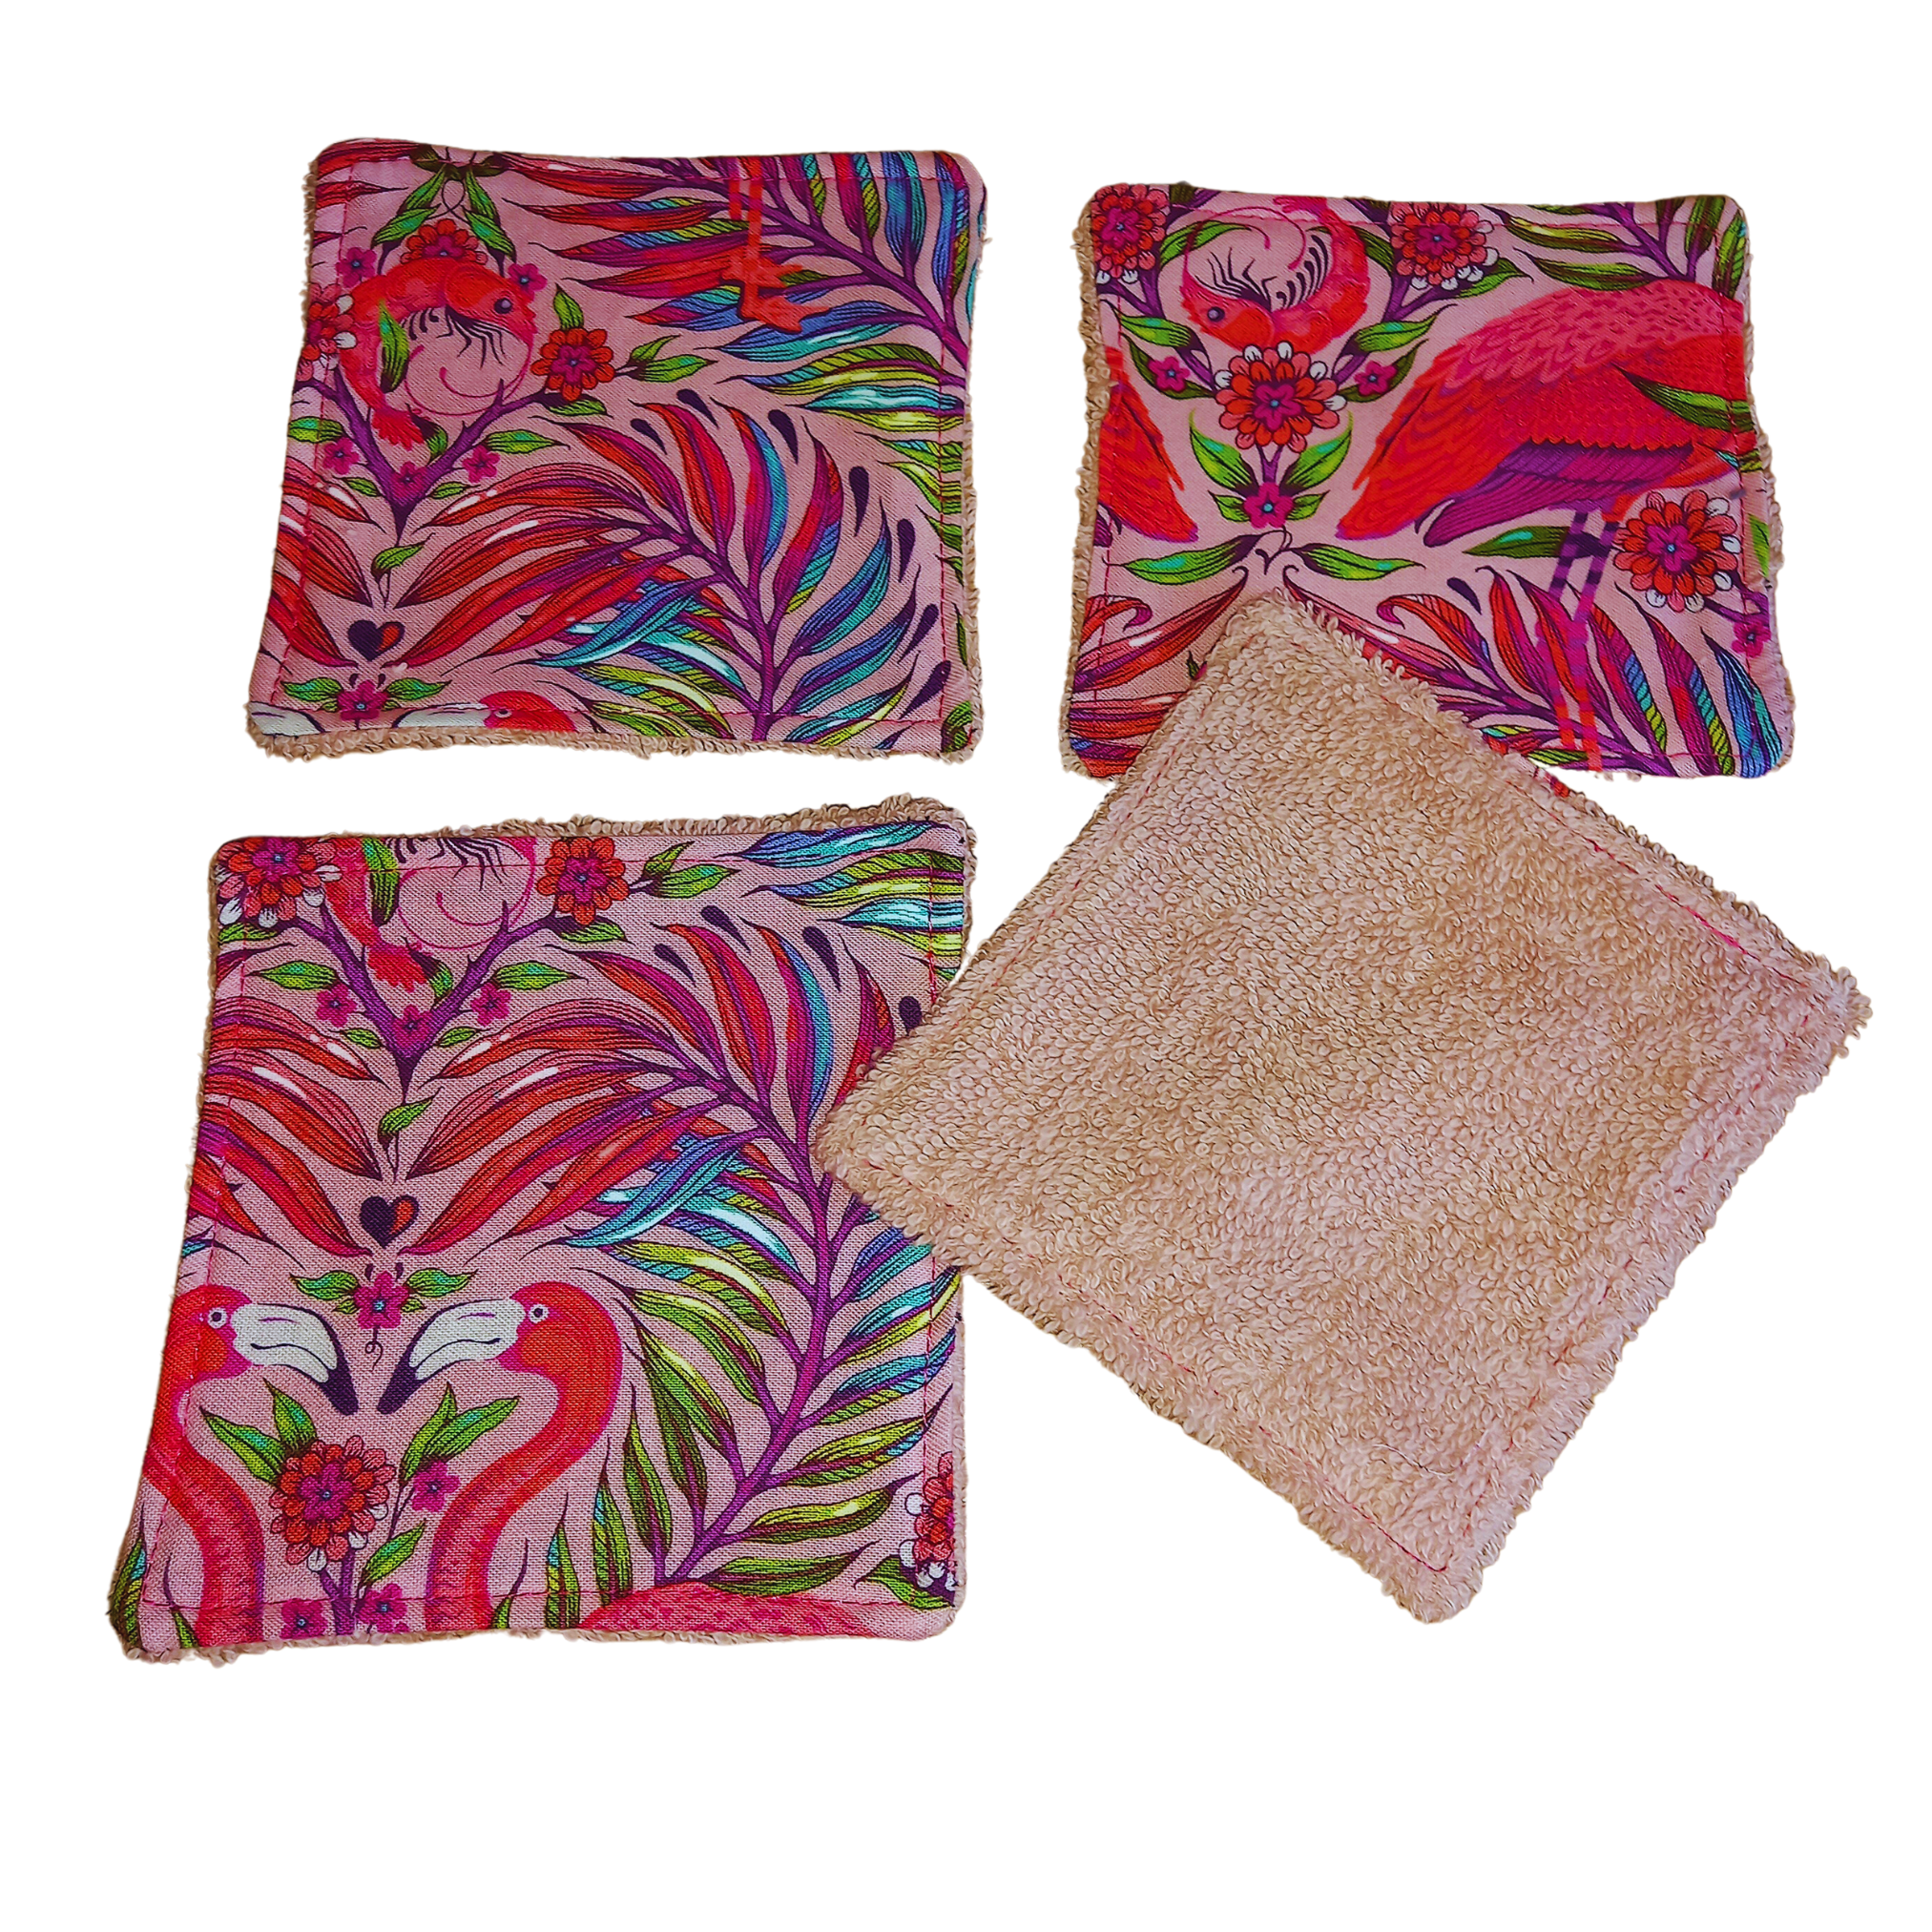 Reusable Cotton Wipes 4 Pack - Make Up - Toddler - Finger Wipes - Flamingo Pink TU with Blush Towelling